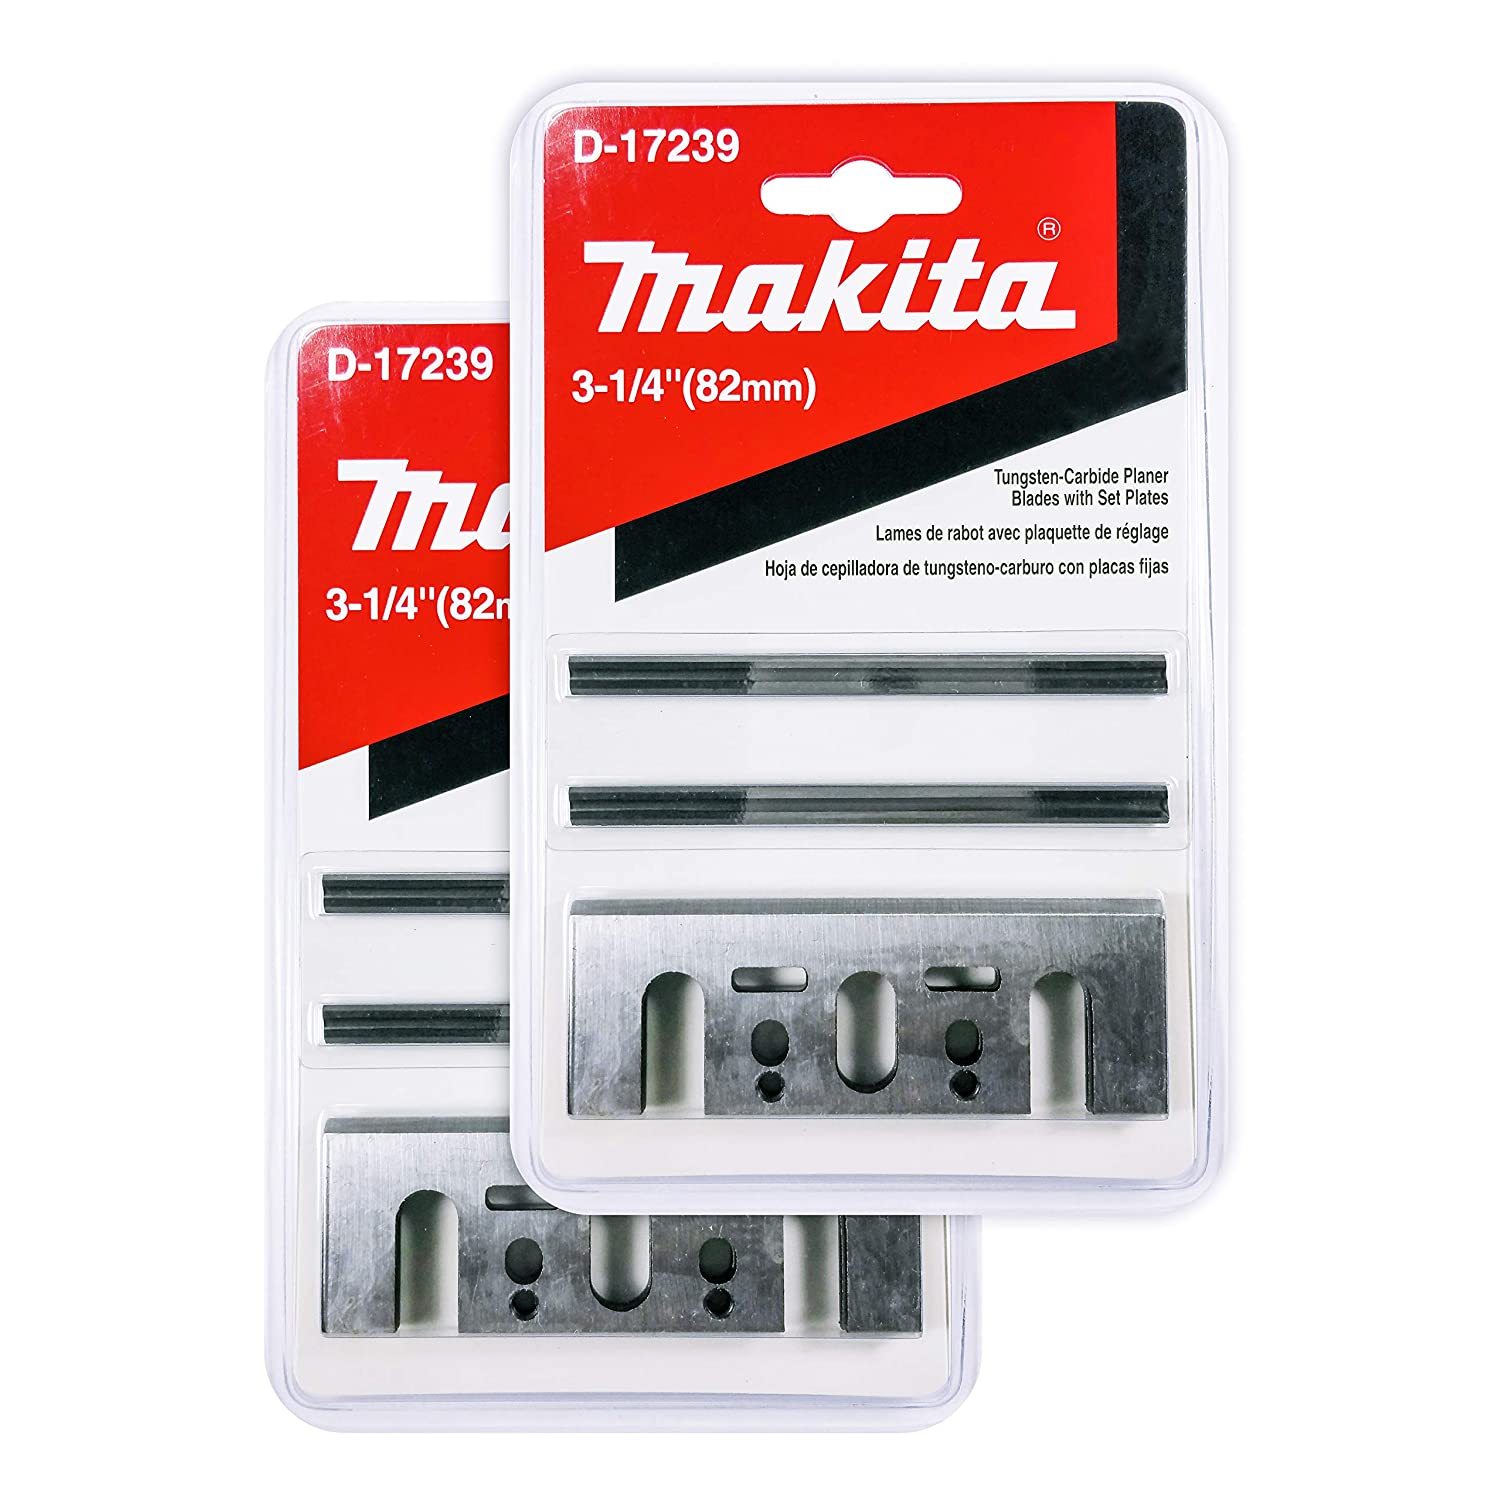 Makita Pack Pc Planer Blade Double Edge Set For Planers Cutting For Hard Wood 3-1 4" Tungsten Carbide 2-Piece Blade - 1